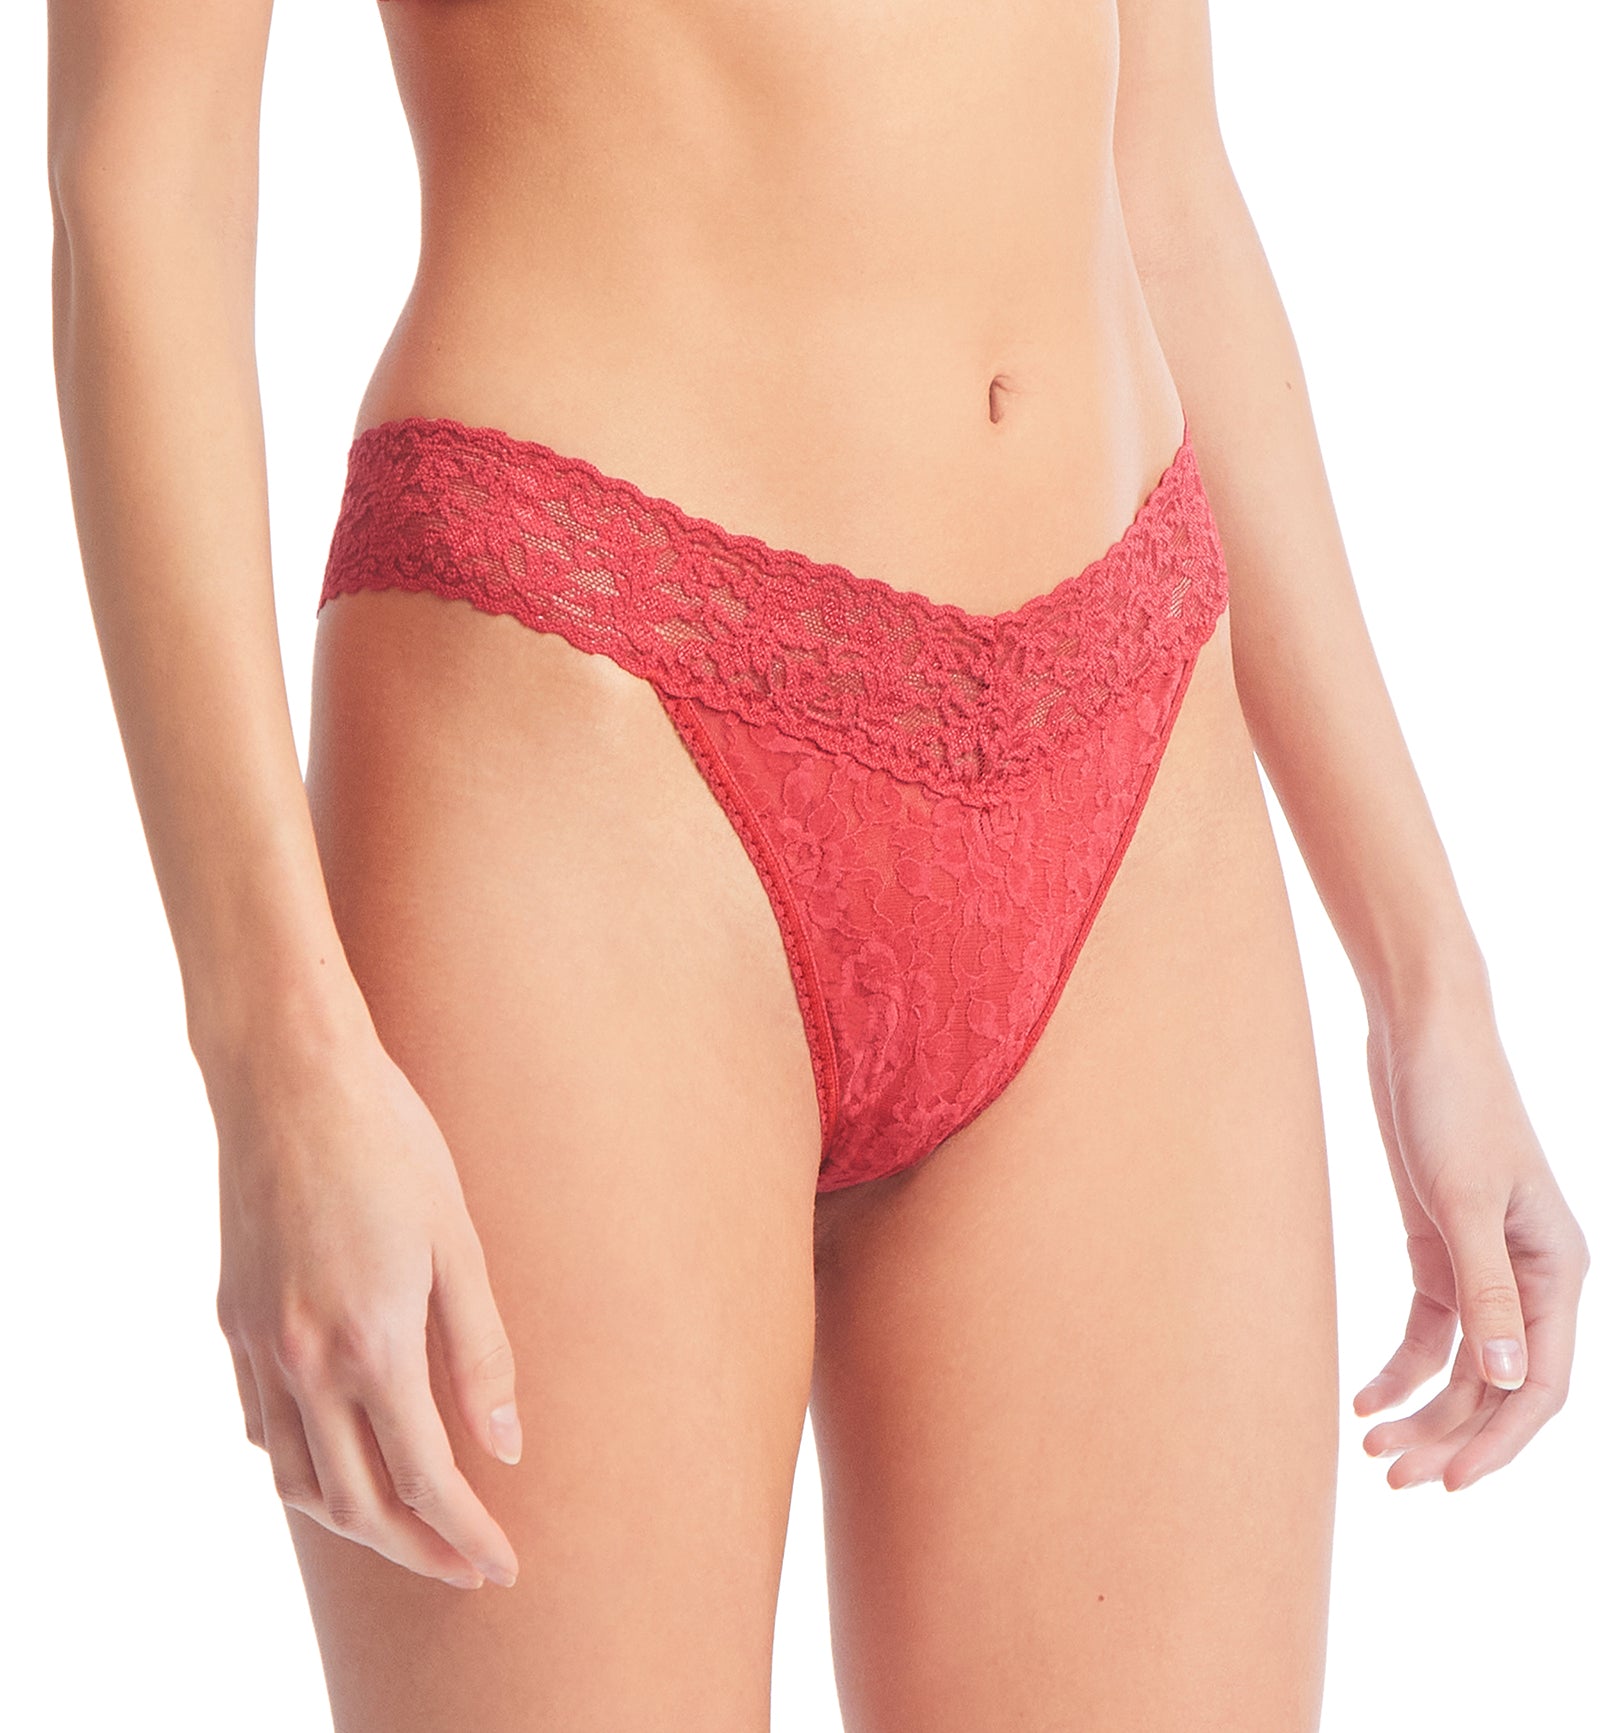 Hanky Panky Signature Lace Original Rise Thong (4811P),Burnt Sienna - Burnt Sienna,One Size